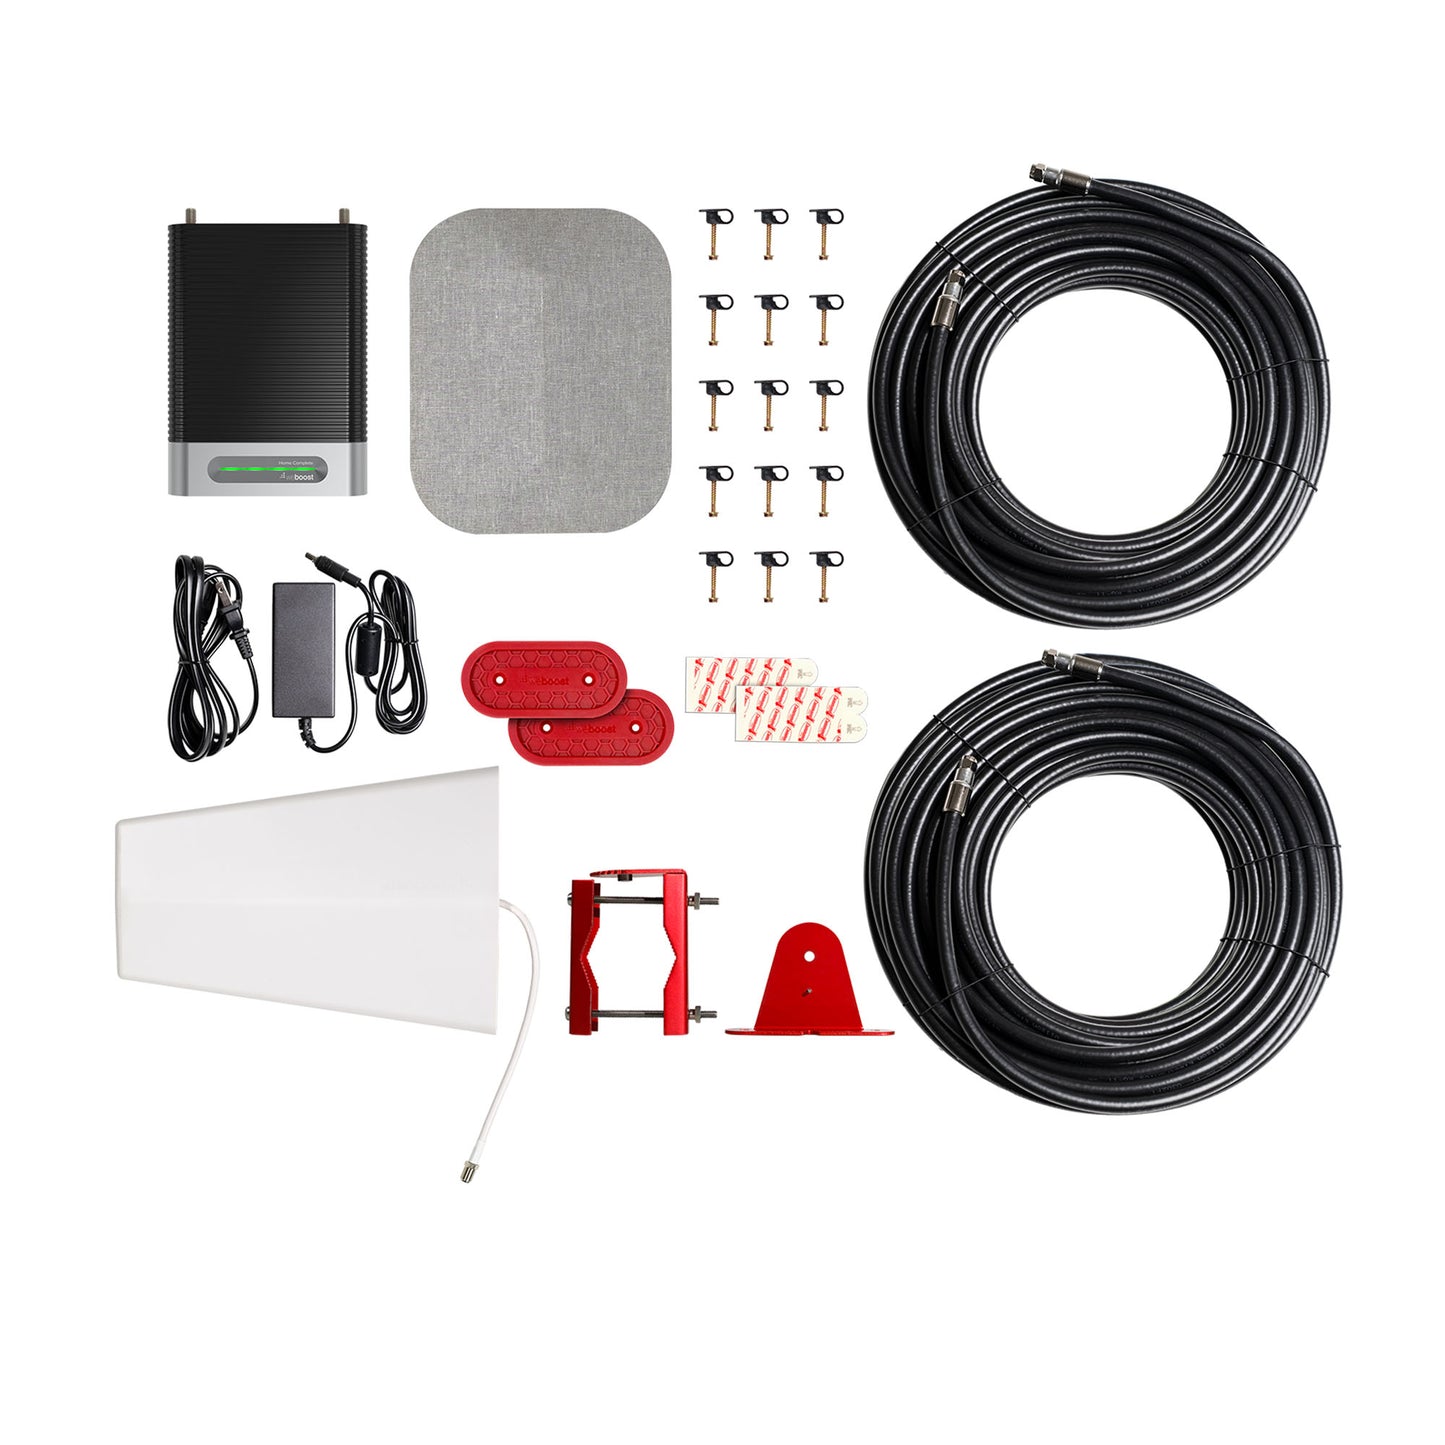 WeBoost Home Complete In-Building Signal Booster Kit - 15-06493